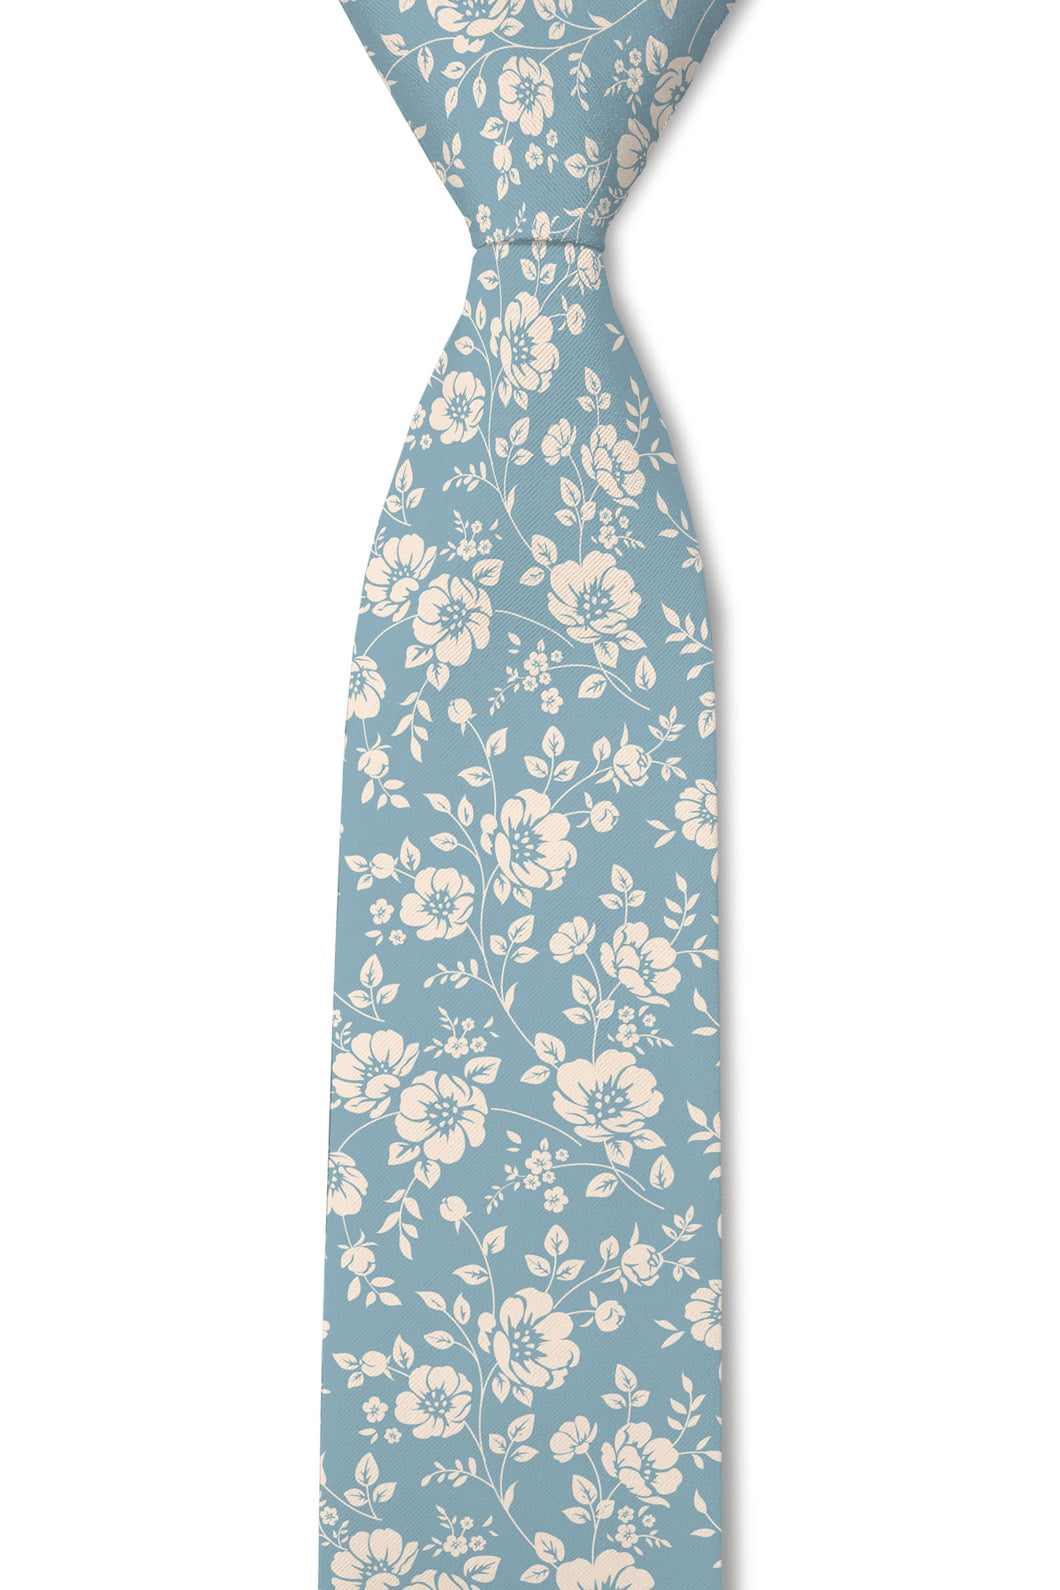 Memory missionary tie